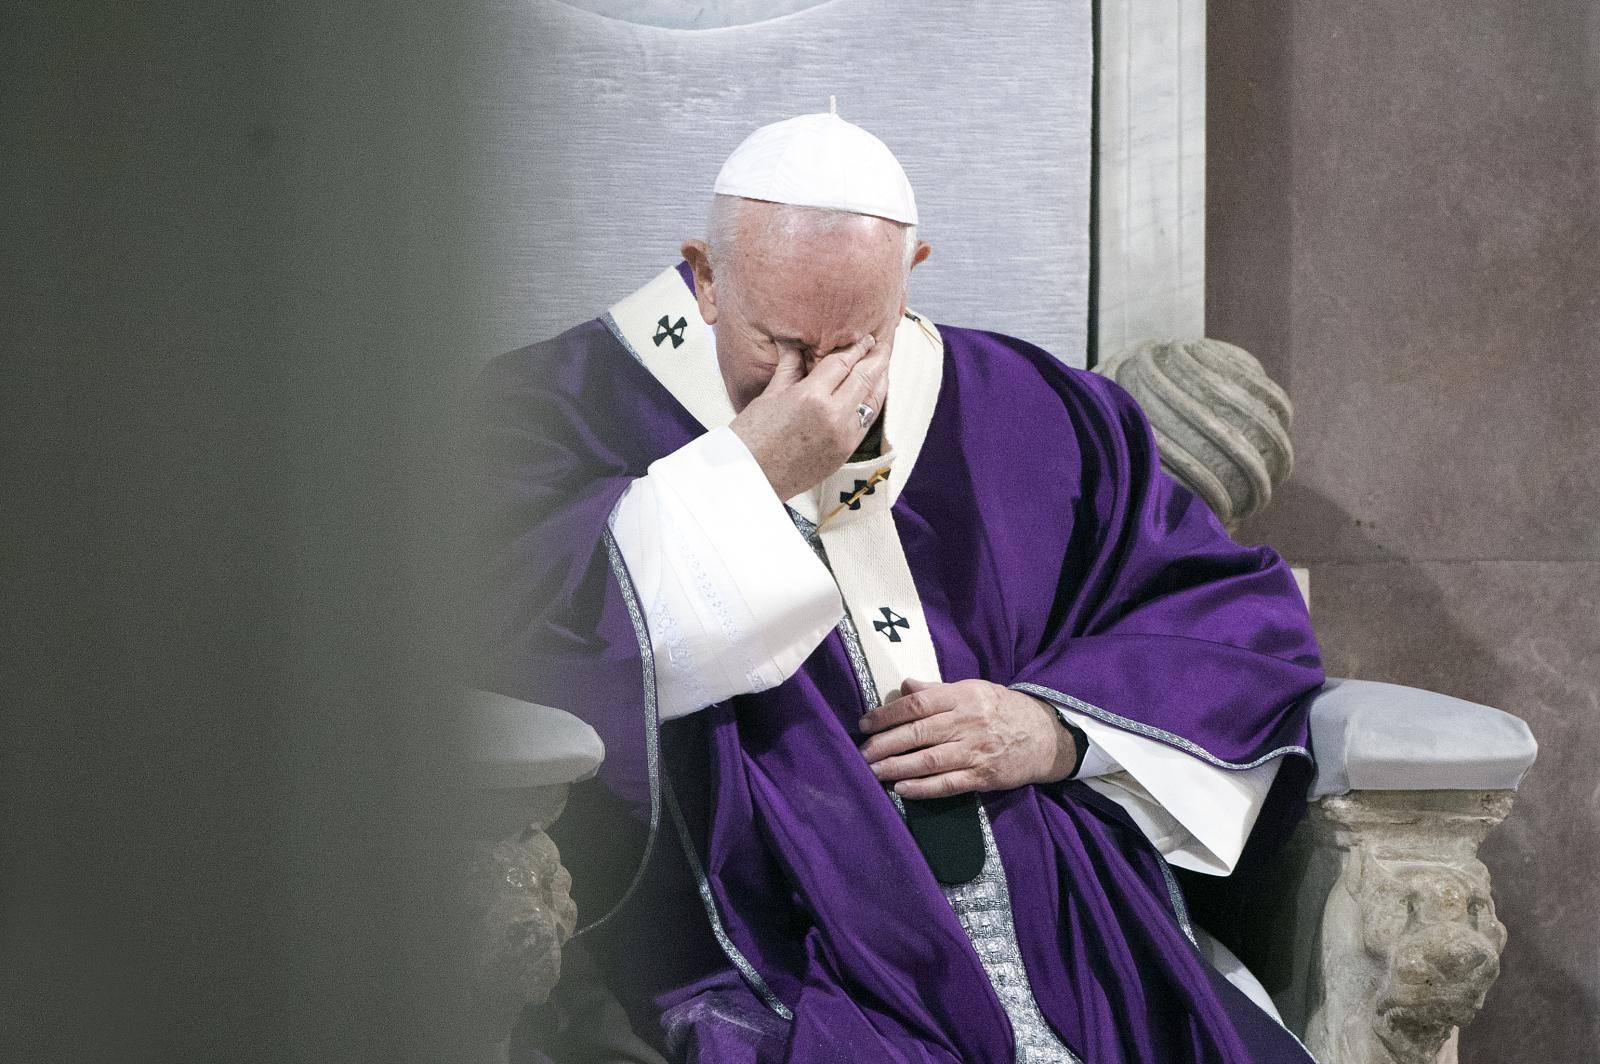 Pope Francis leads the Ash Wednesday mass which opens Lent, the forty-day period of abstinence and deprivation for Christians before Holy Week and Easter, on February 26, 2020, at the Santa Sabina church in Rome